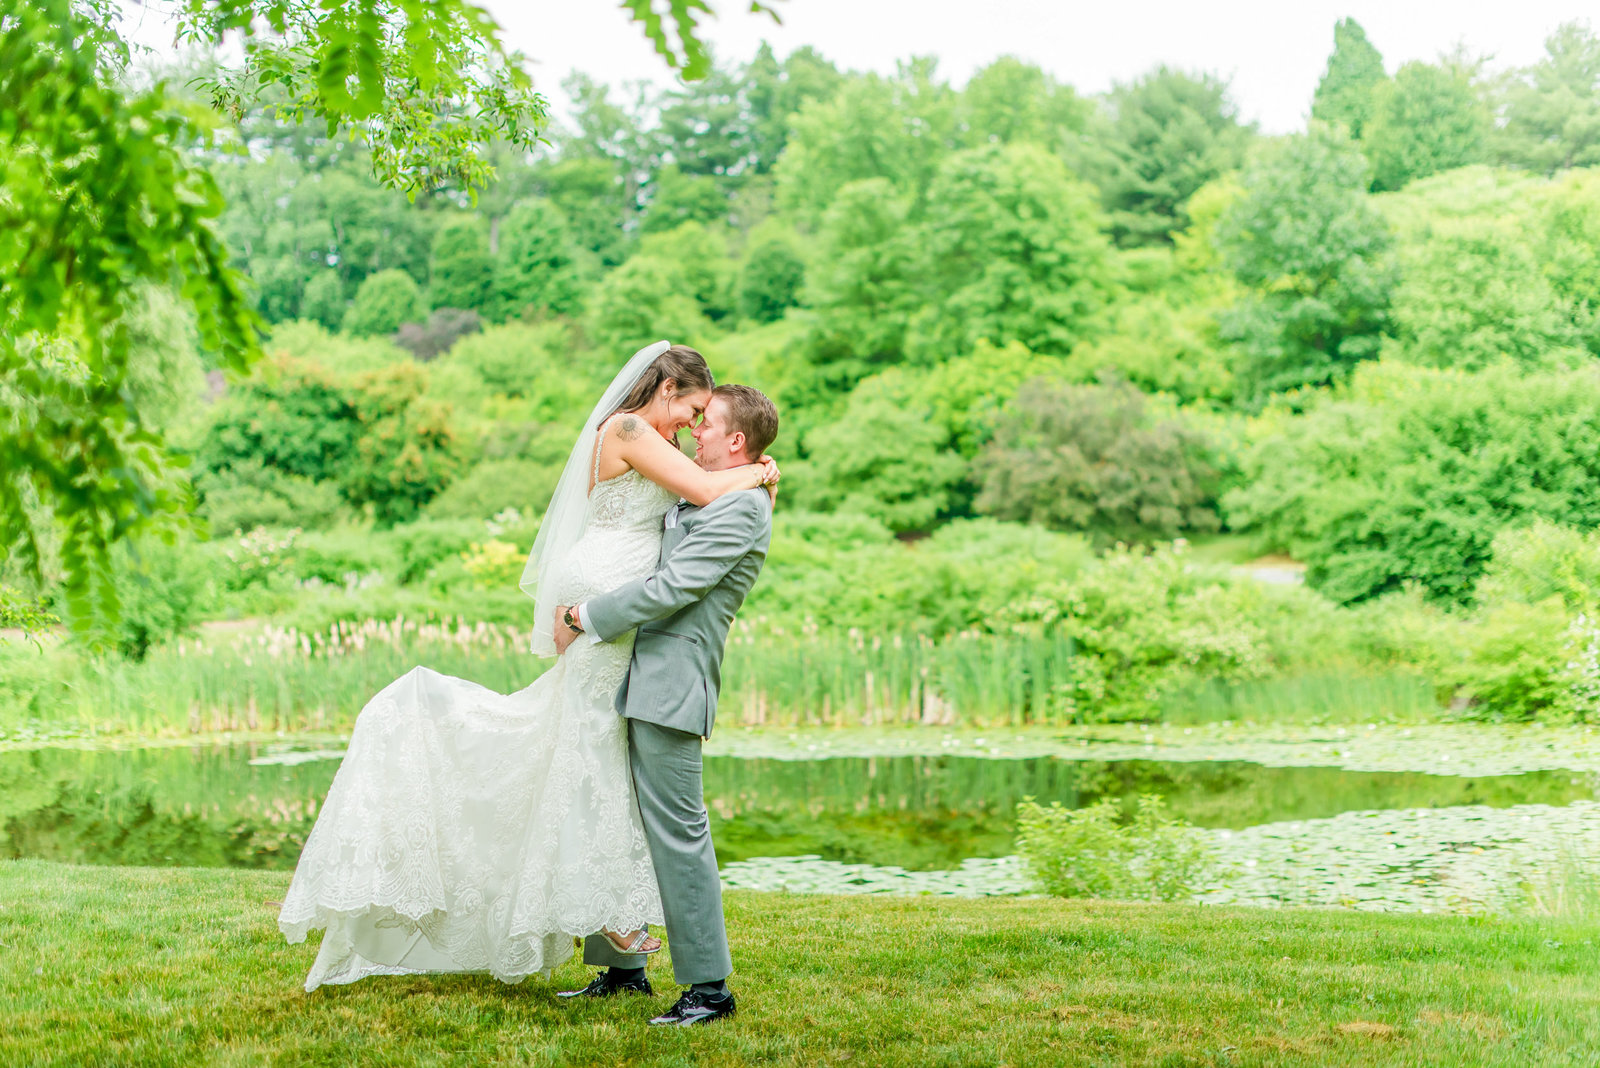 Groom lifts bride for a picture in front of a pond surrounded by green trees. Syracuse Photographer